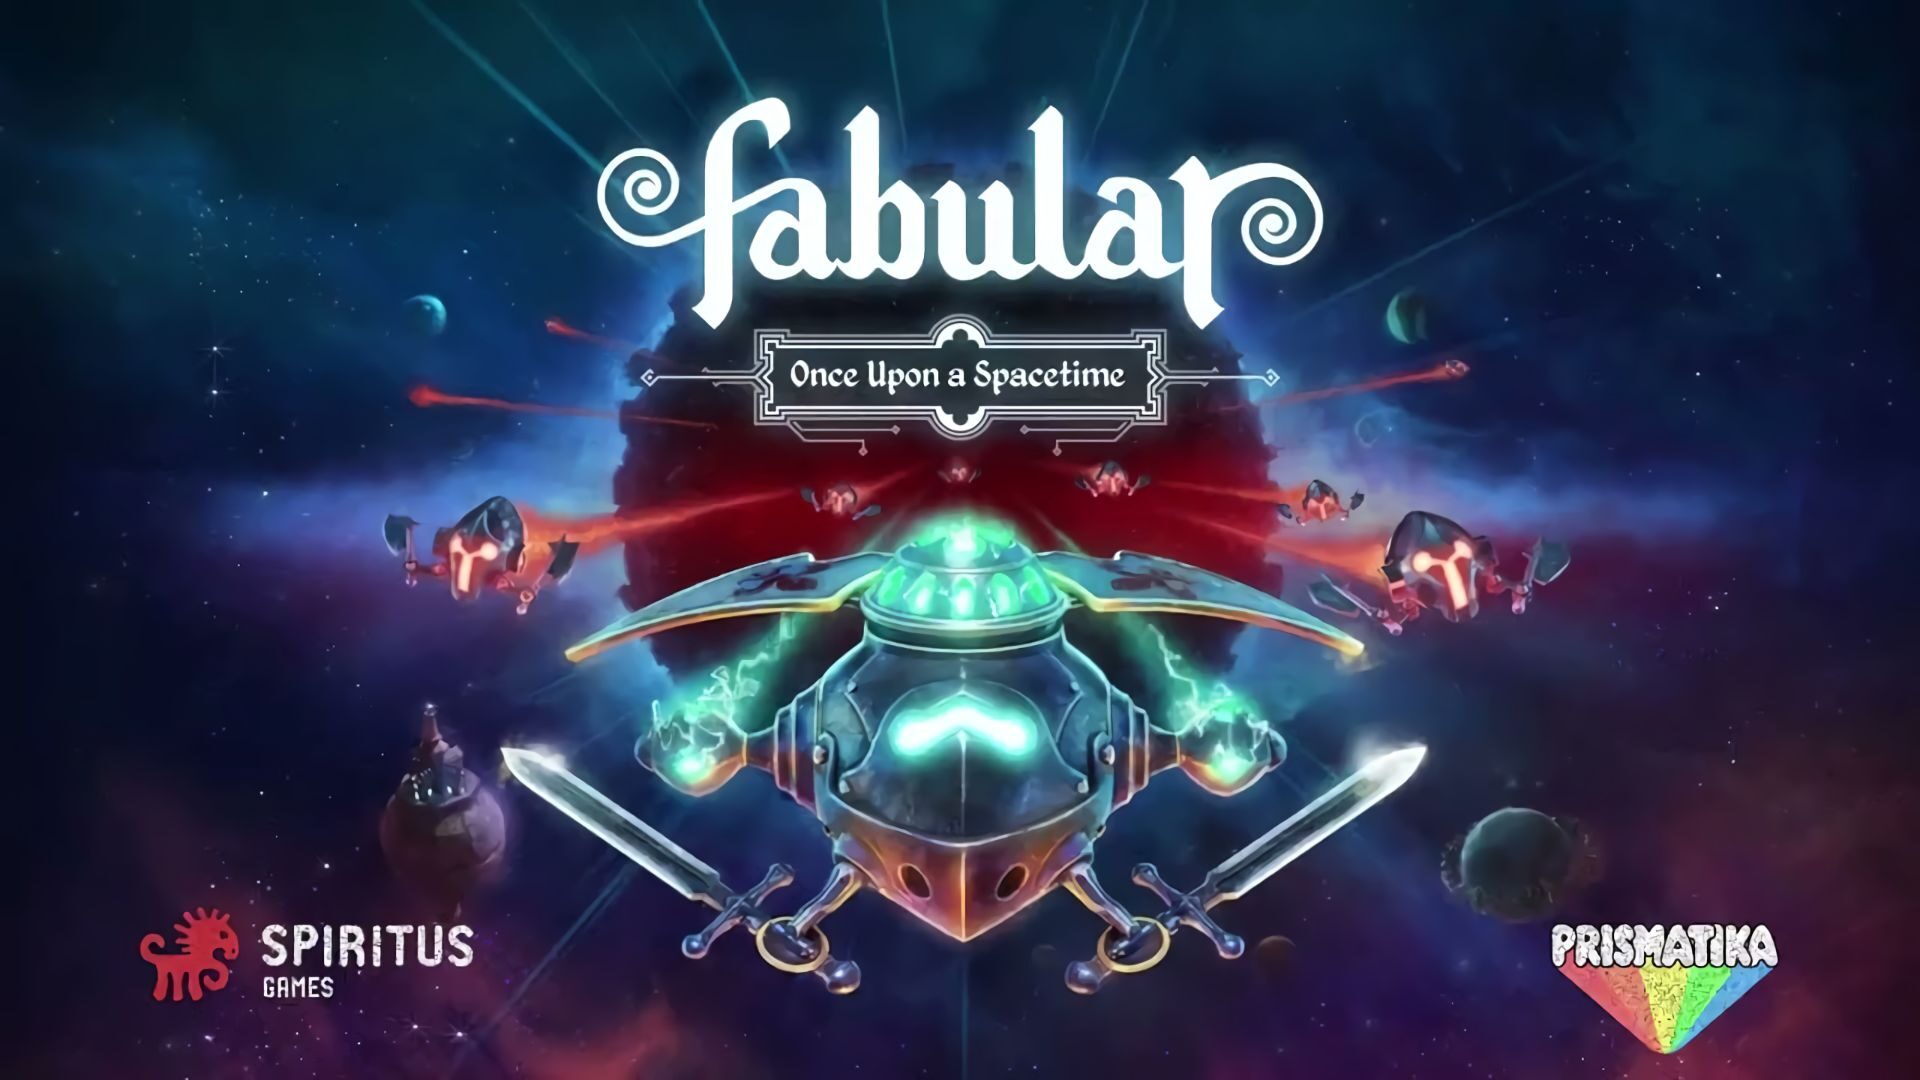 download the new version for mac Fabular: Once Upon a Spacetime